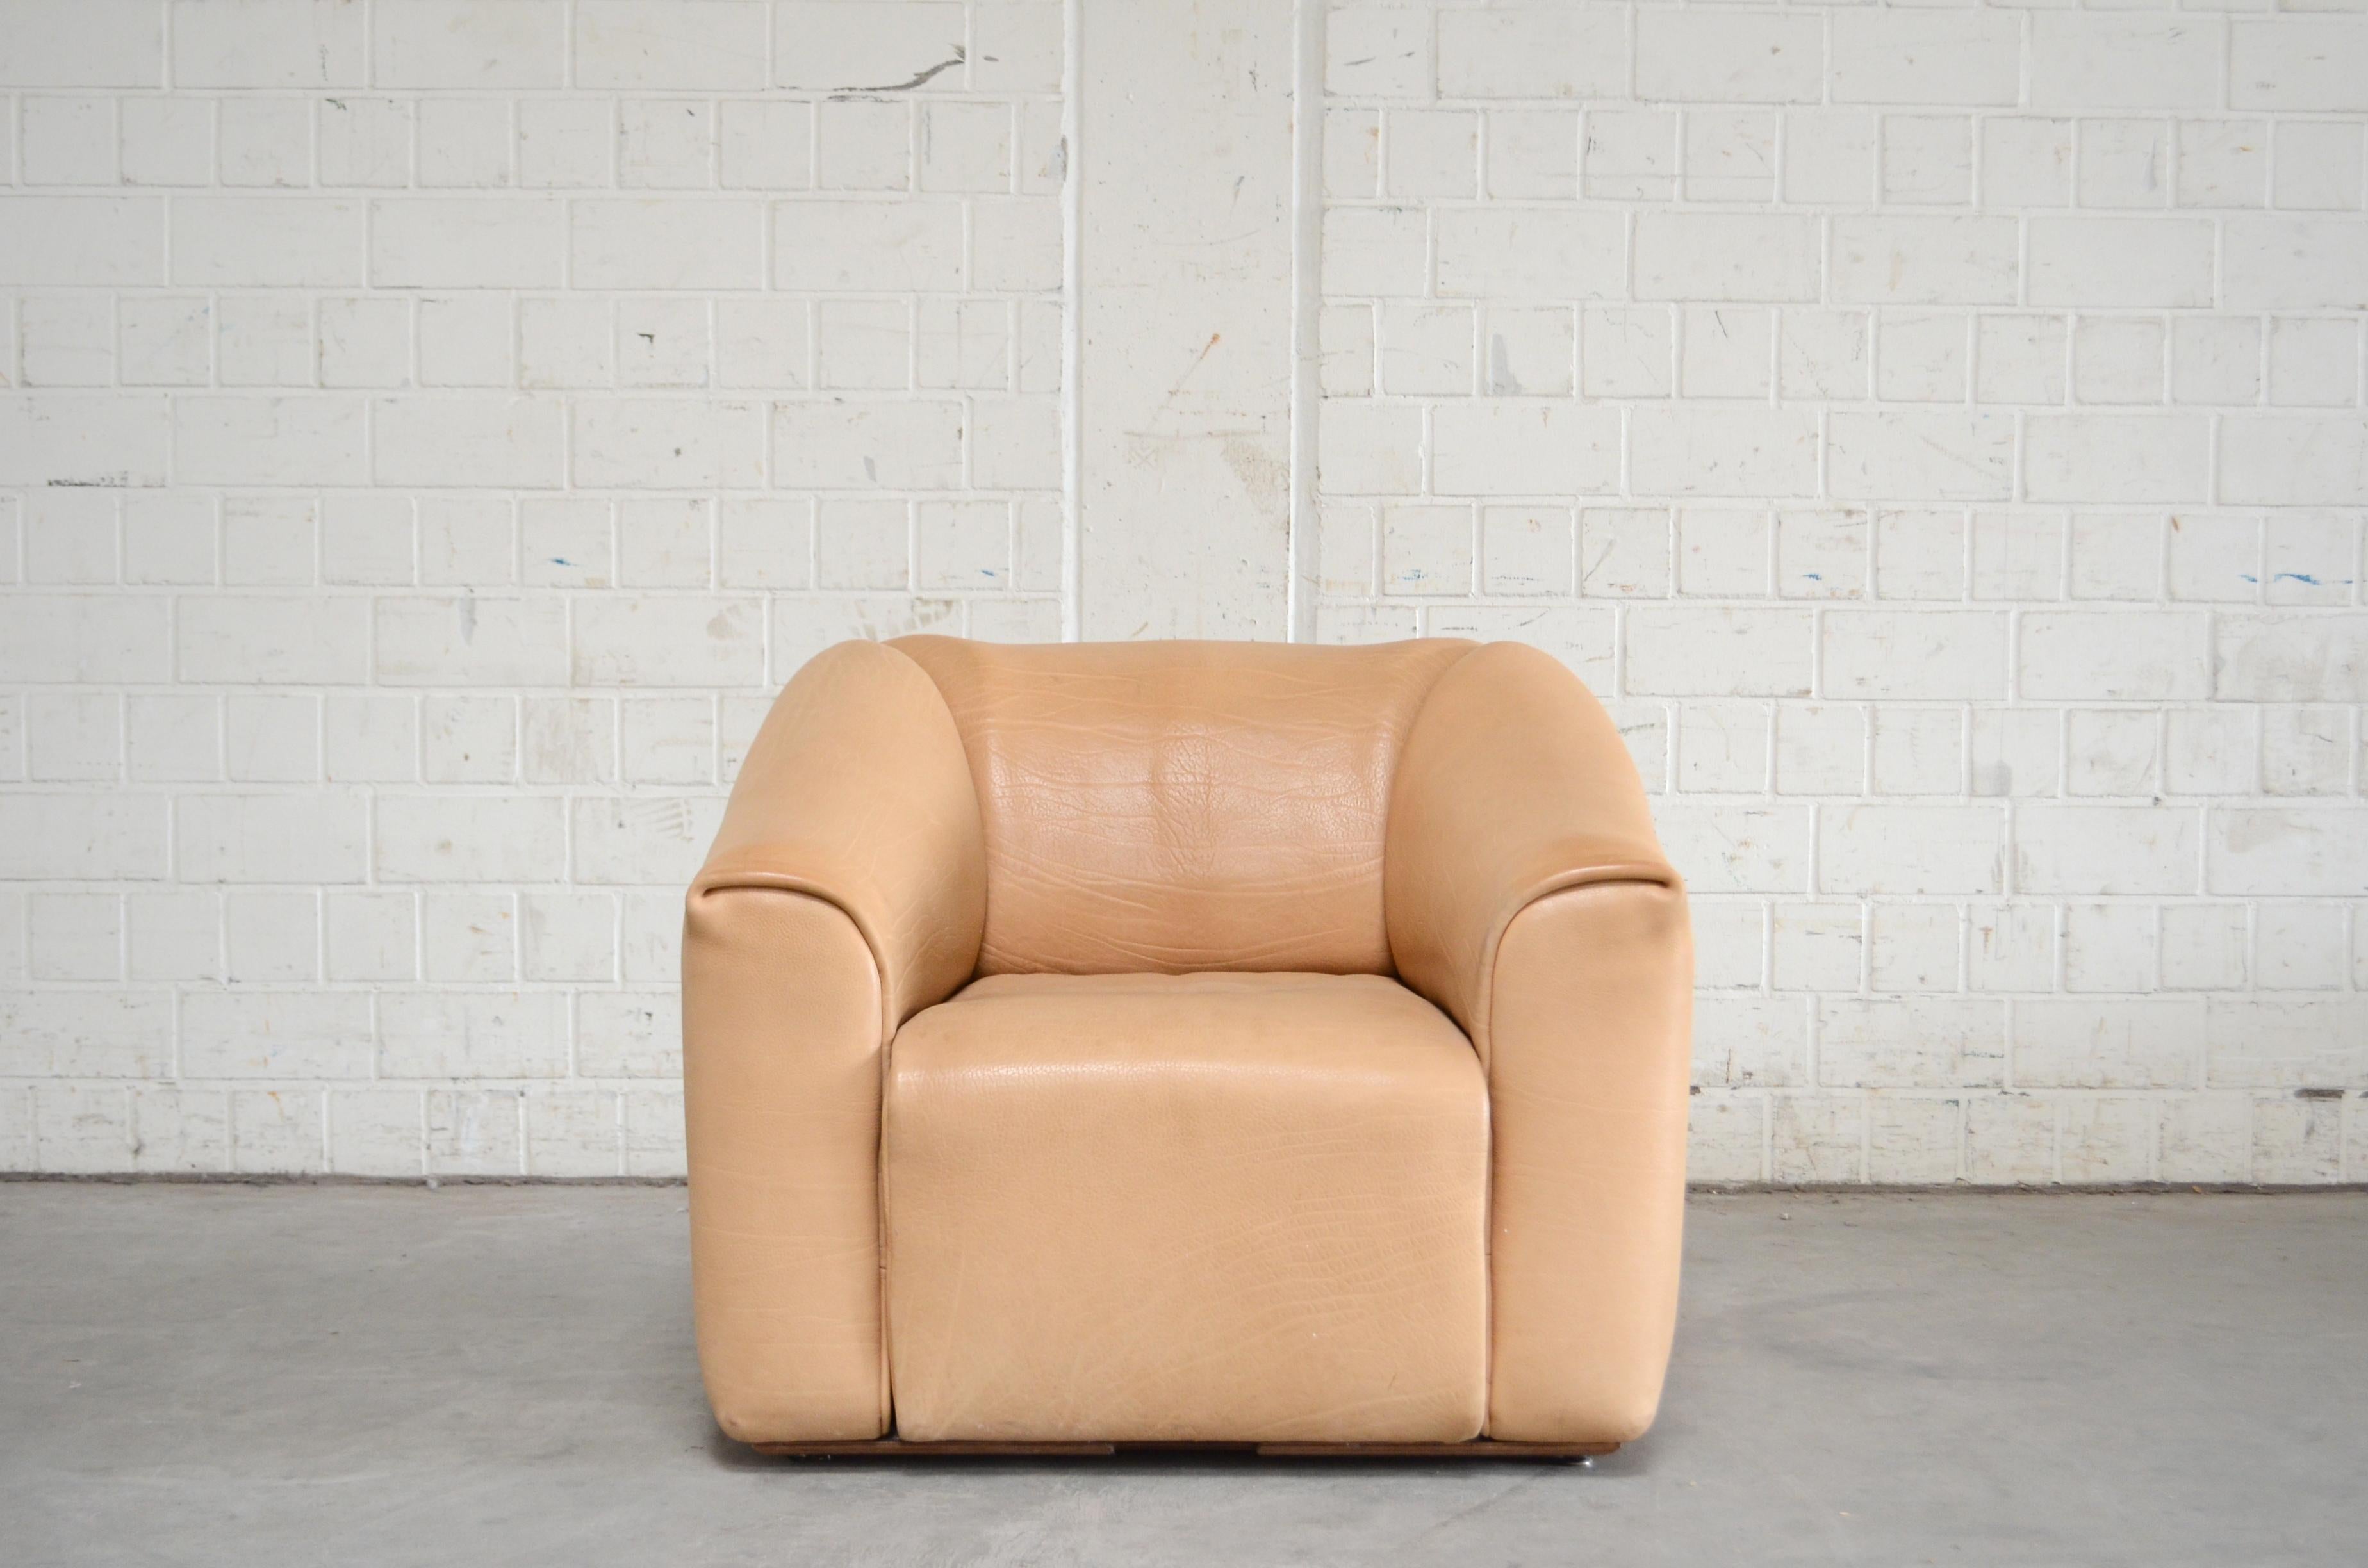 De Sede DS 47 / 01 neck leather armchair.
This DS-47 was manufactured in Switzerland by De Sede and is upholstered in 3-5 mm thick, natural hide.
The leather color is beautiful with name cocos.
The seat is extendable for 15 cm for more seating